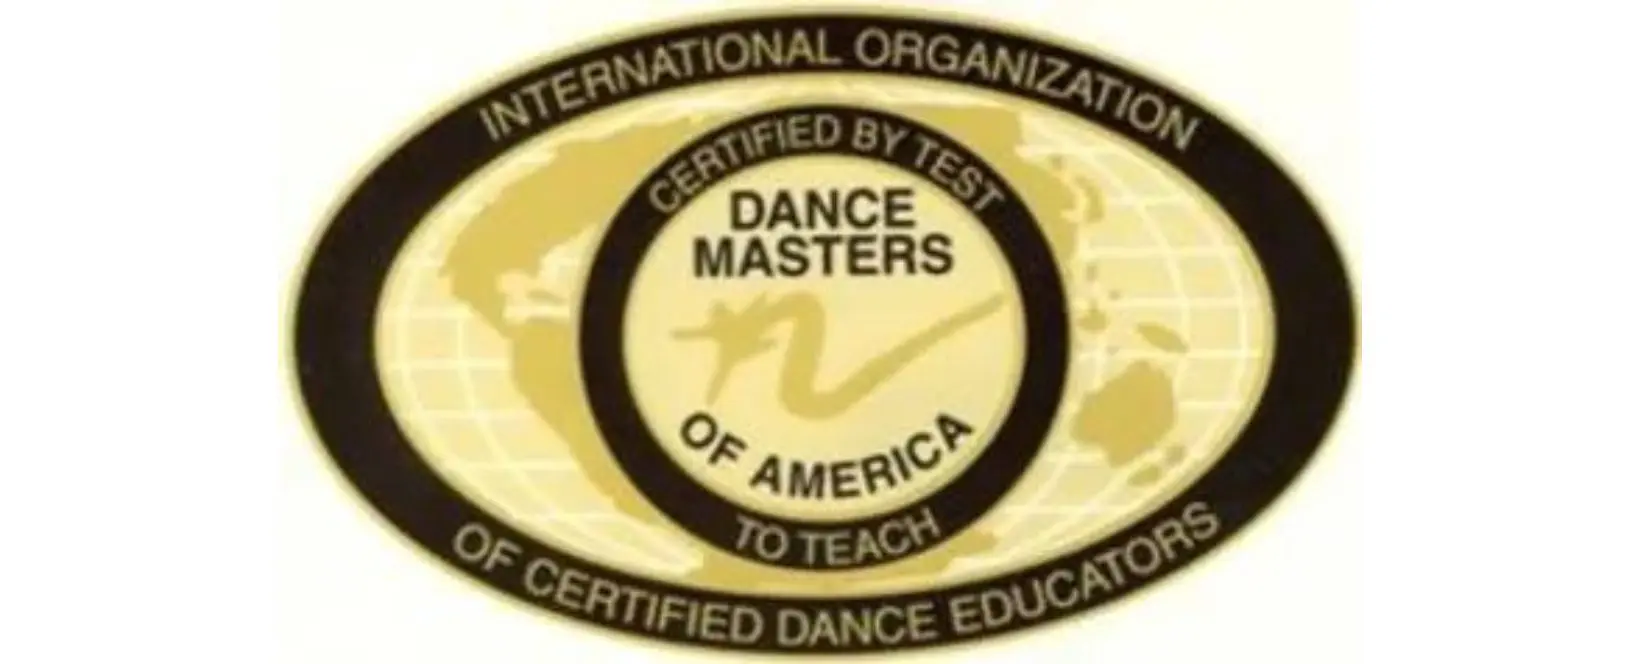 A dance master certification seal is shown.